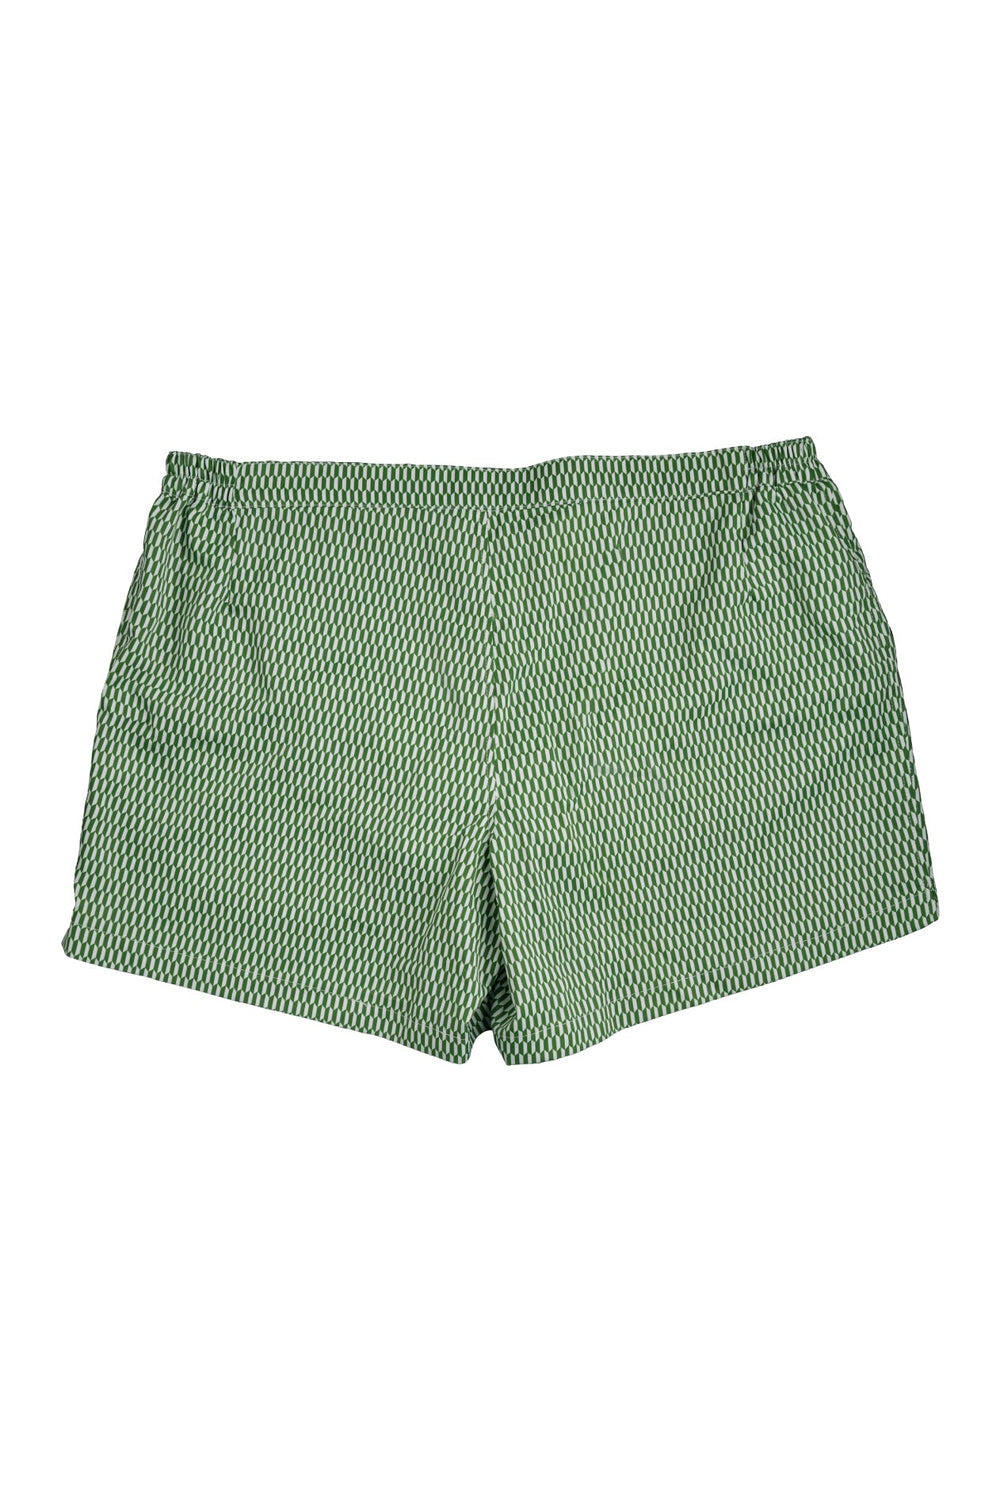 Green patterned shorts displayed against a white background